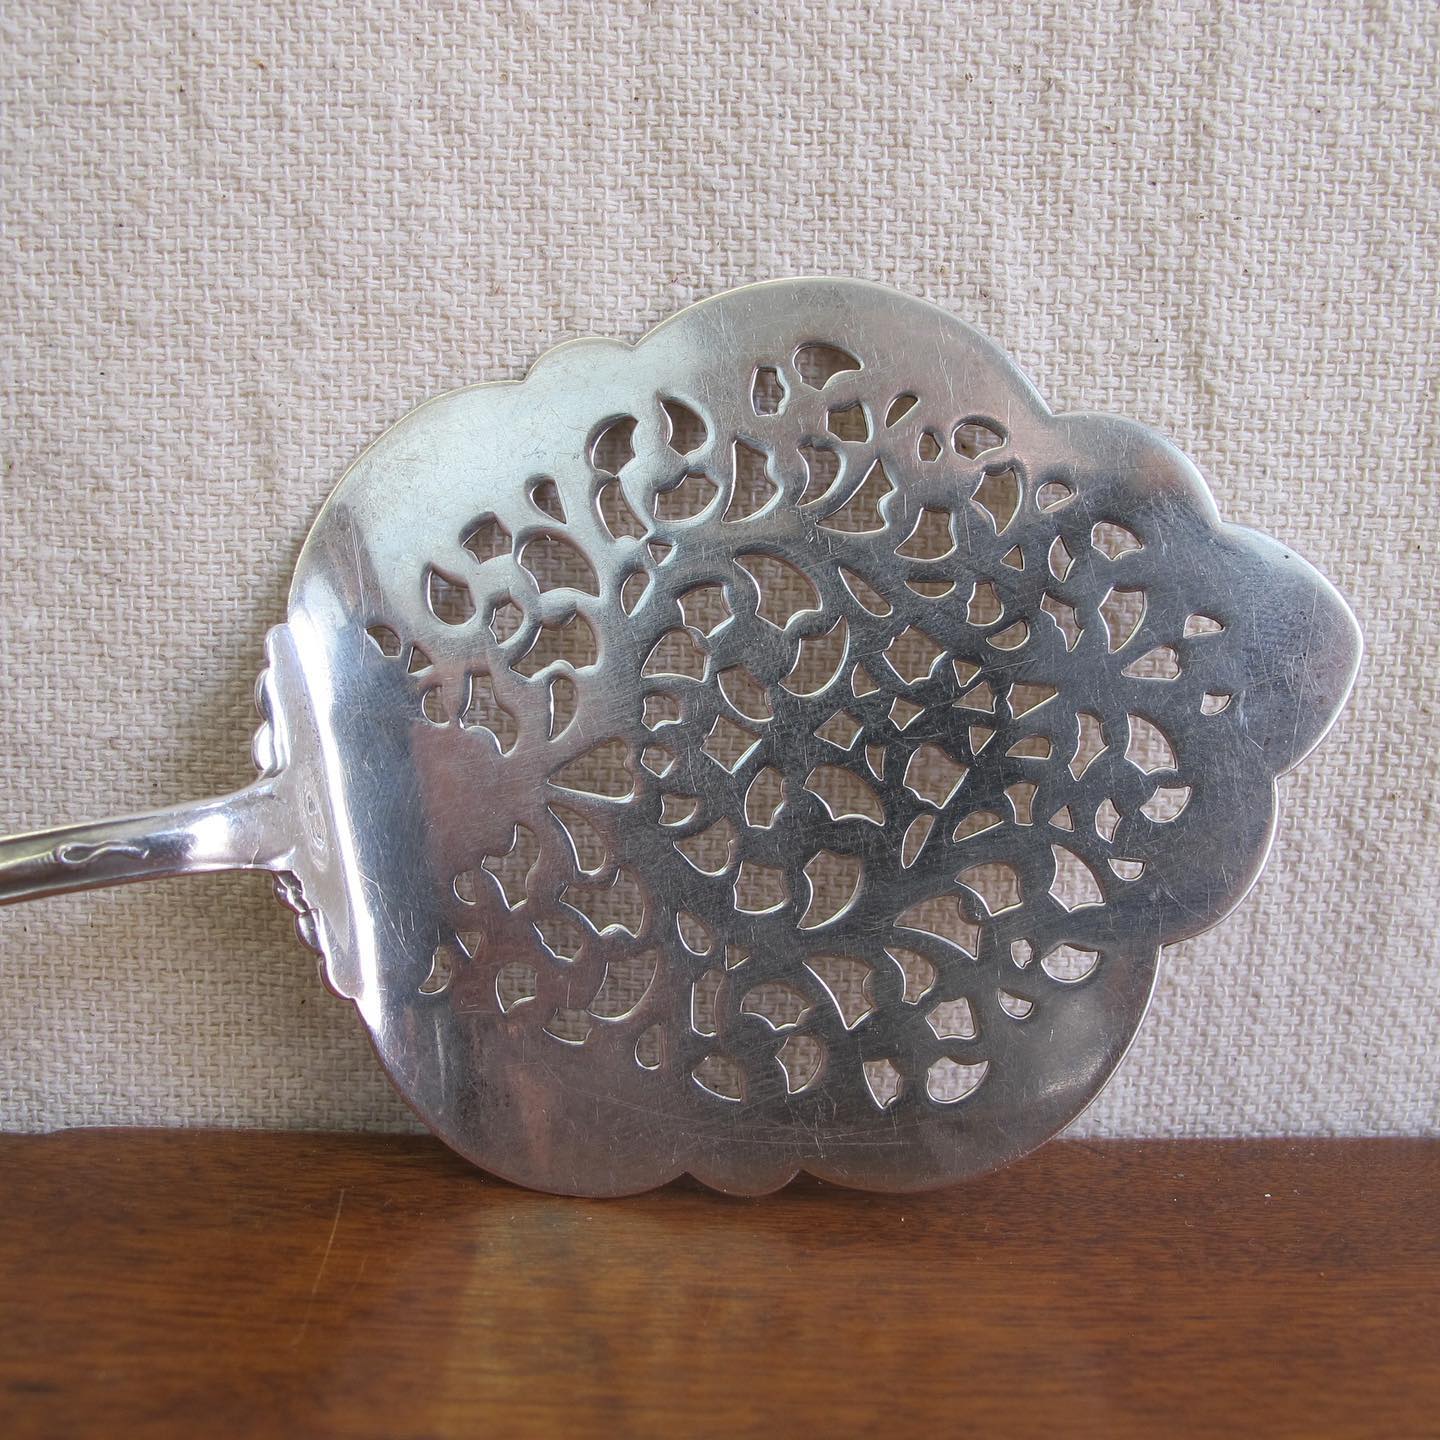 Edwardian / Victorian sterling silver reticulated tomato server or small cake server, beautiful crisp quality, c. 1900